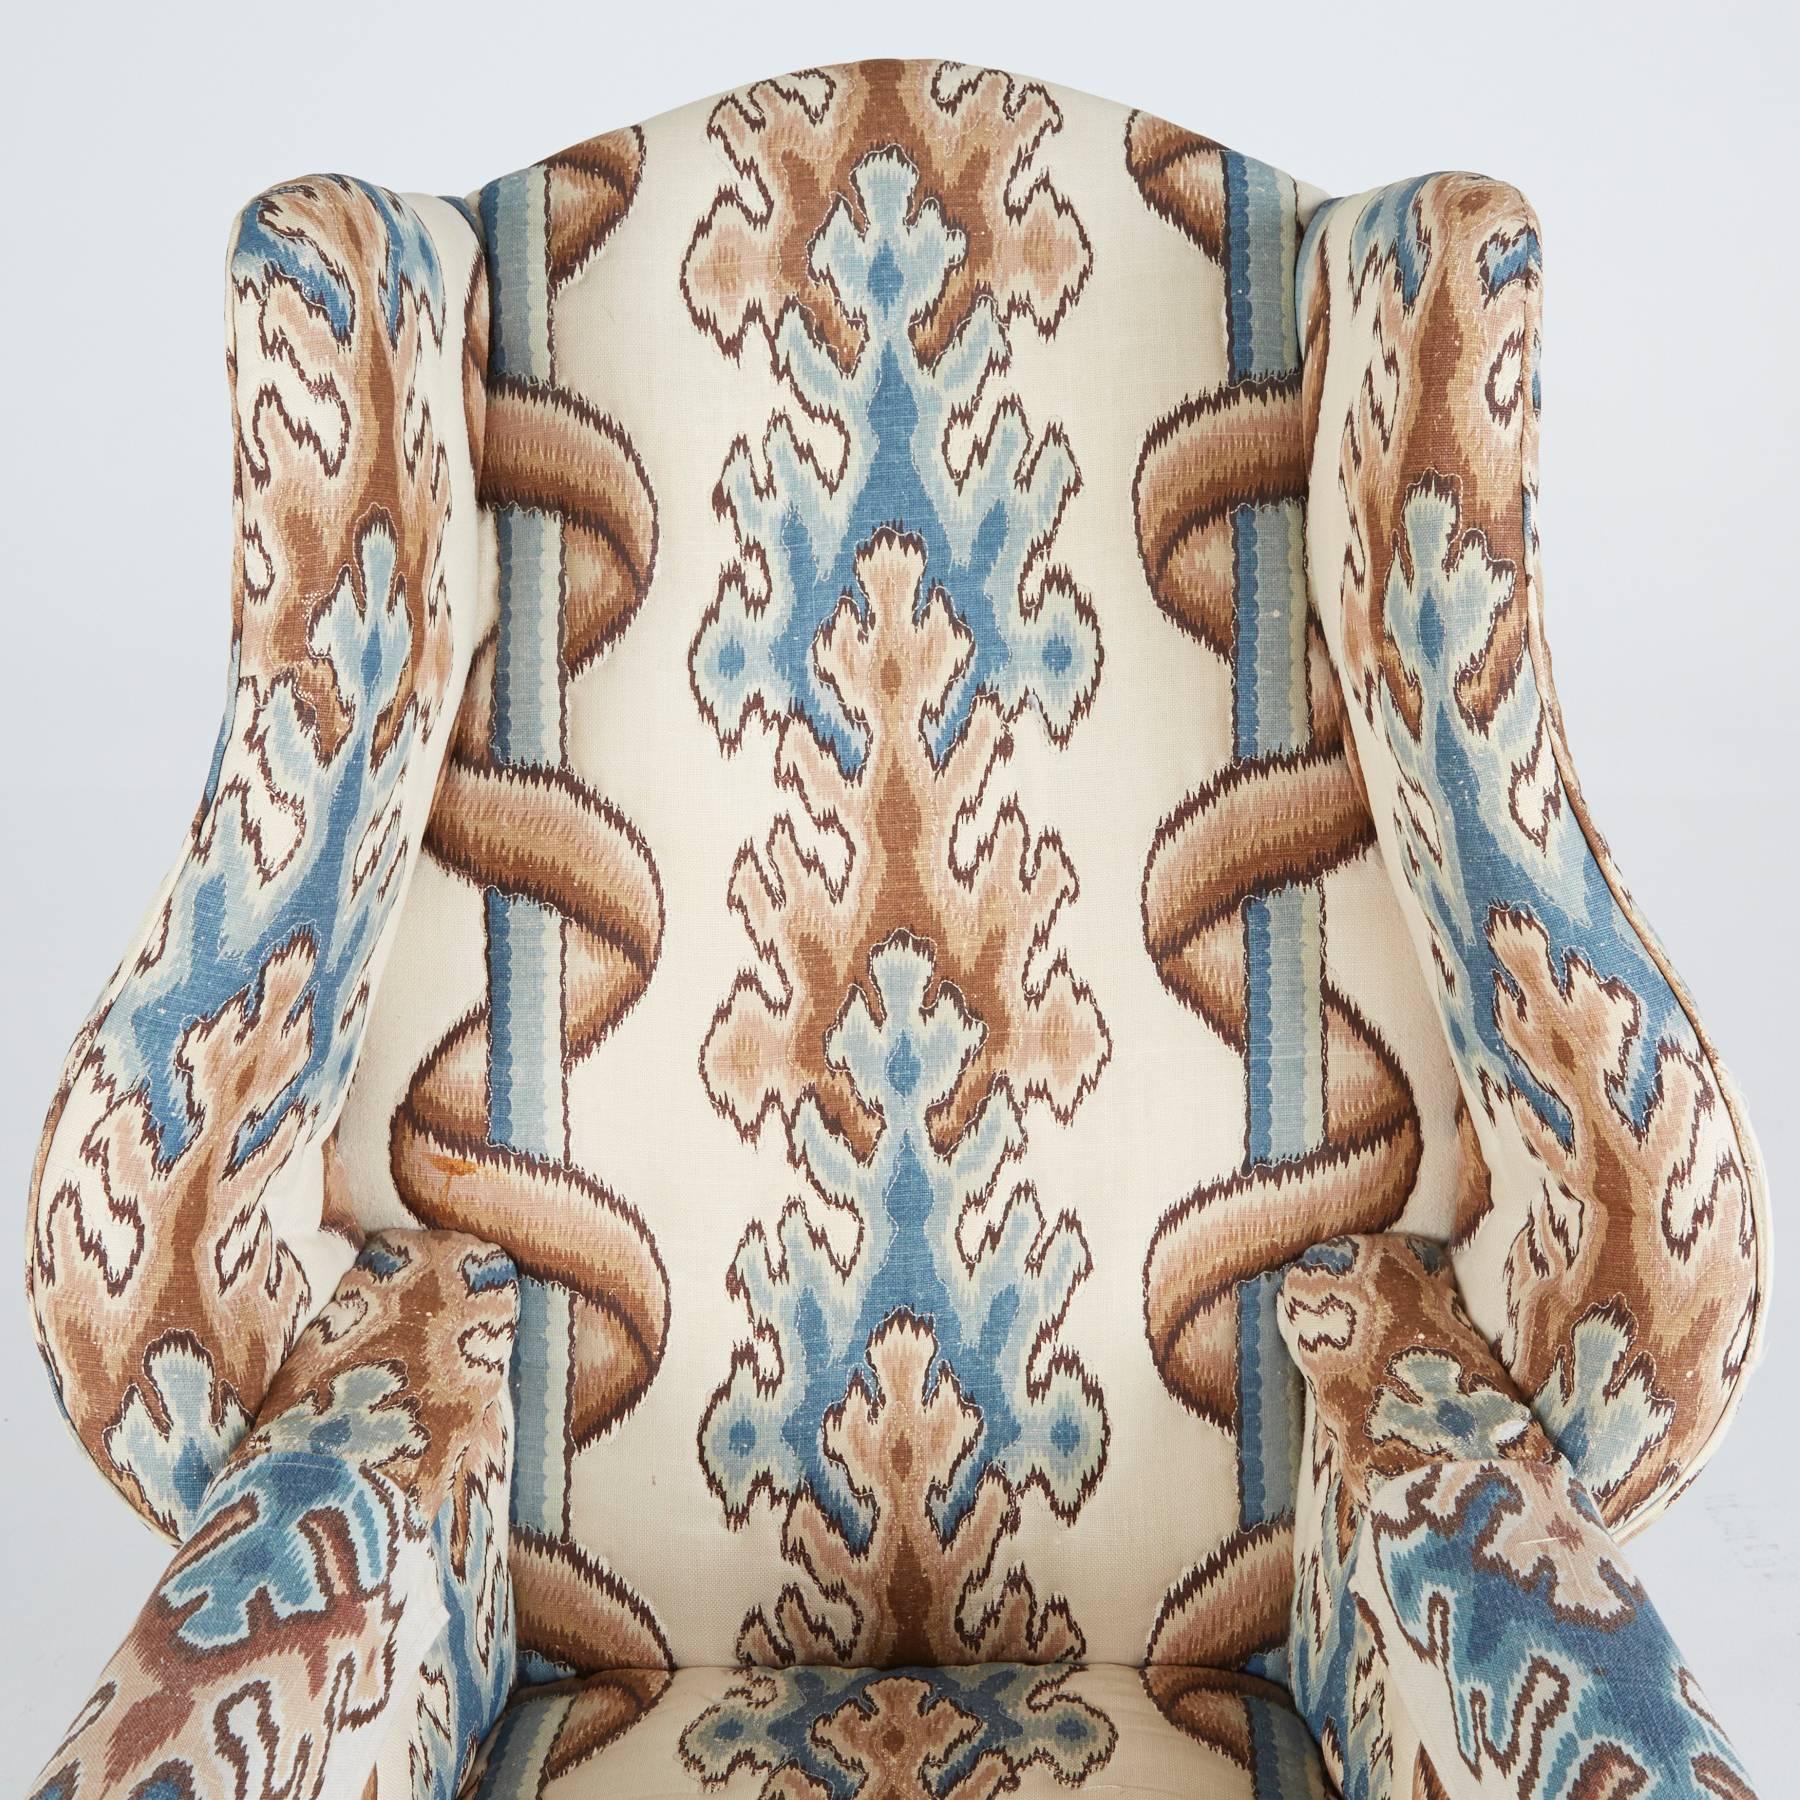 This armchair was created in the style of Chippendale, Georgian, Edwardian, and English Rococo aesthetics. Elevated on mahogany legs, this regal chair features curvaceous arm rests and is upholstered in a blue, brown, and cream abstract print.

In